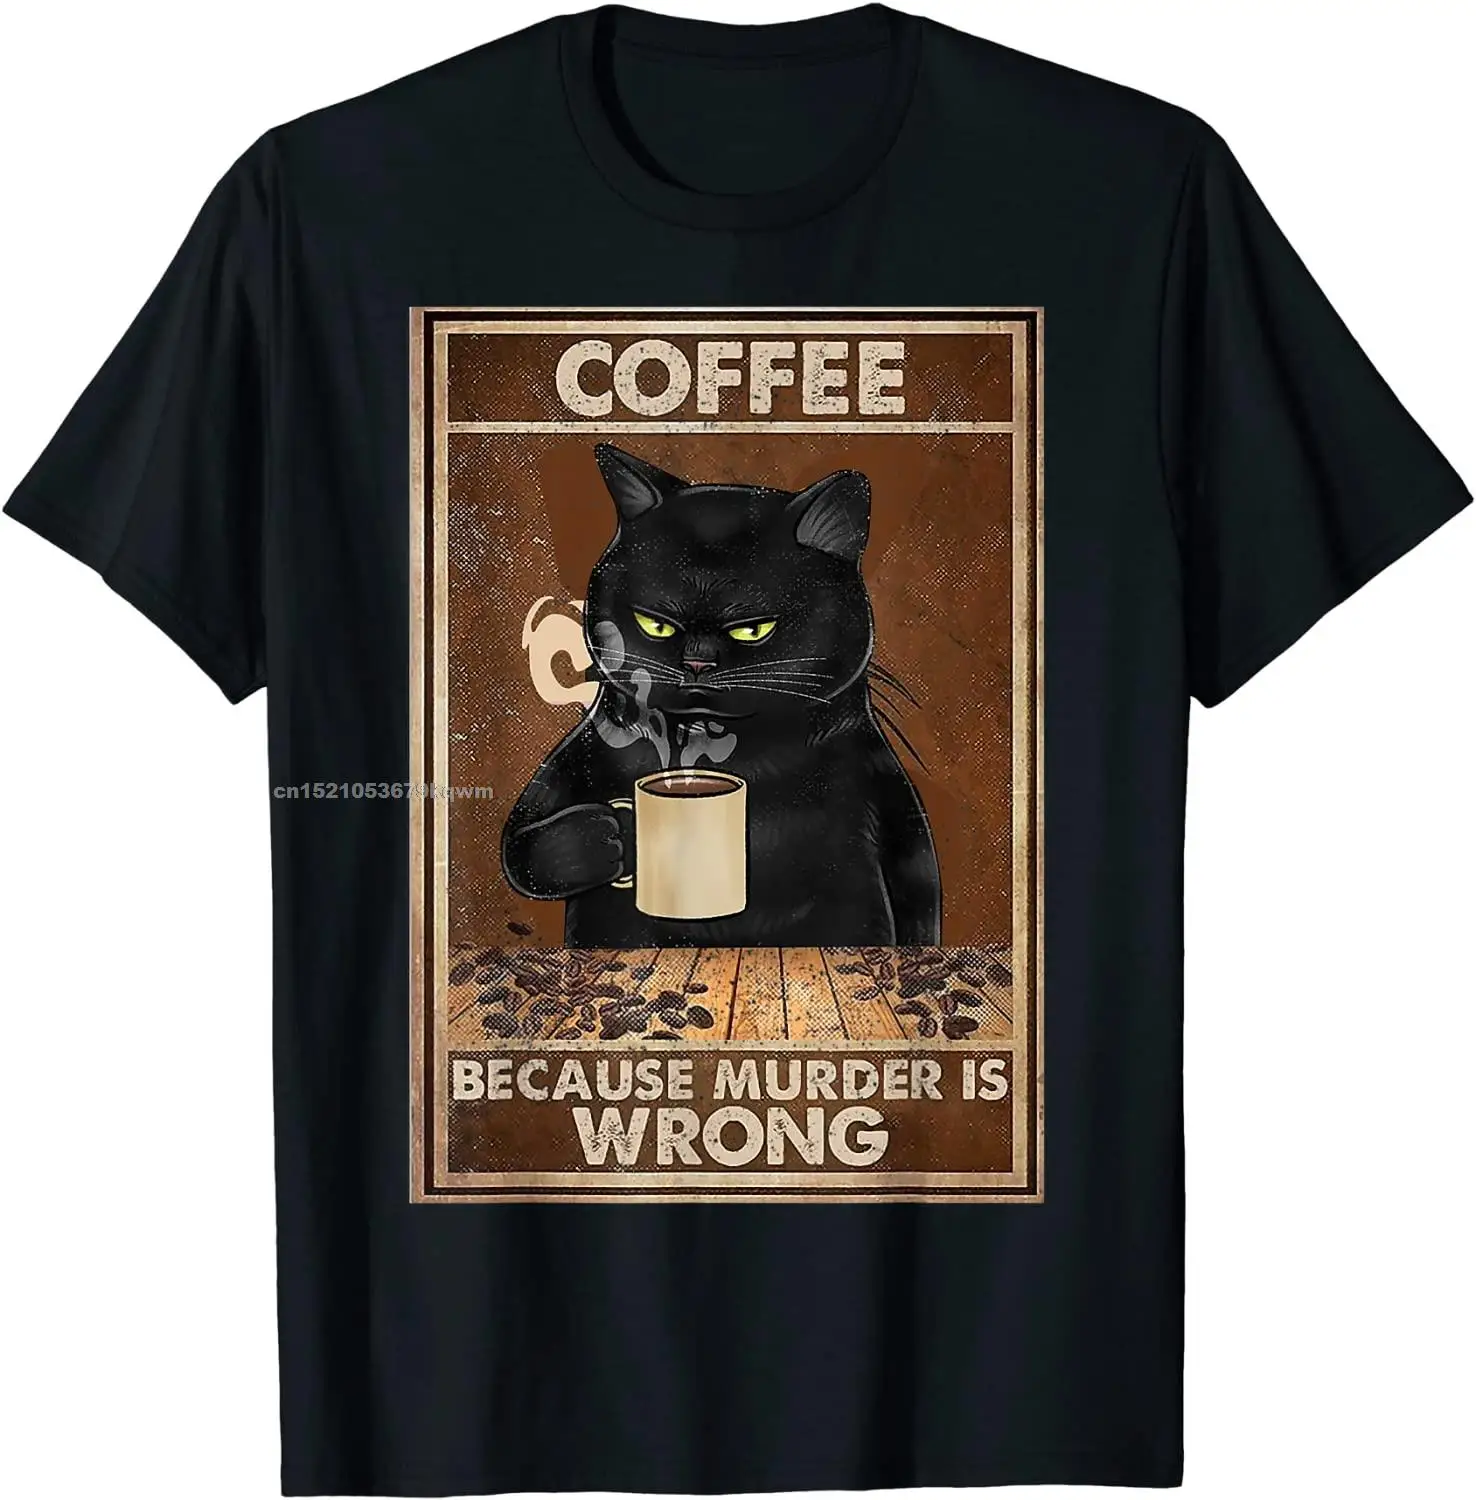 

Coffee Because Murder Is Wrong Black Cat Drinks Coffee Funny T-Shirt Oversized Hip hop T Shirt Cotton Tops Tees for Men Leisure